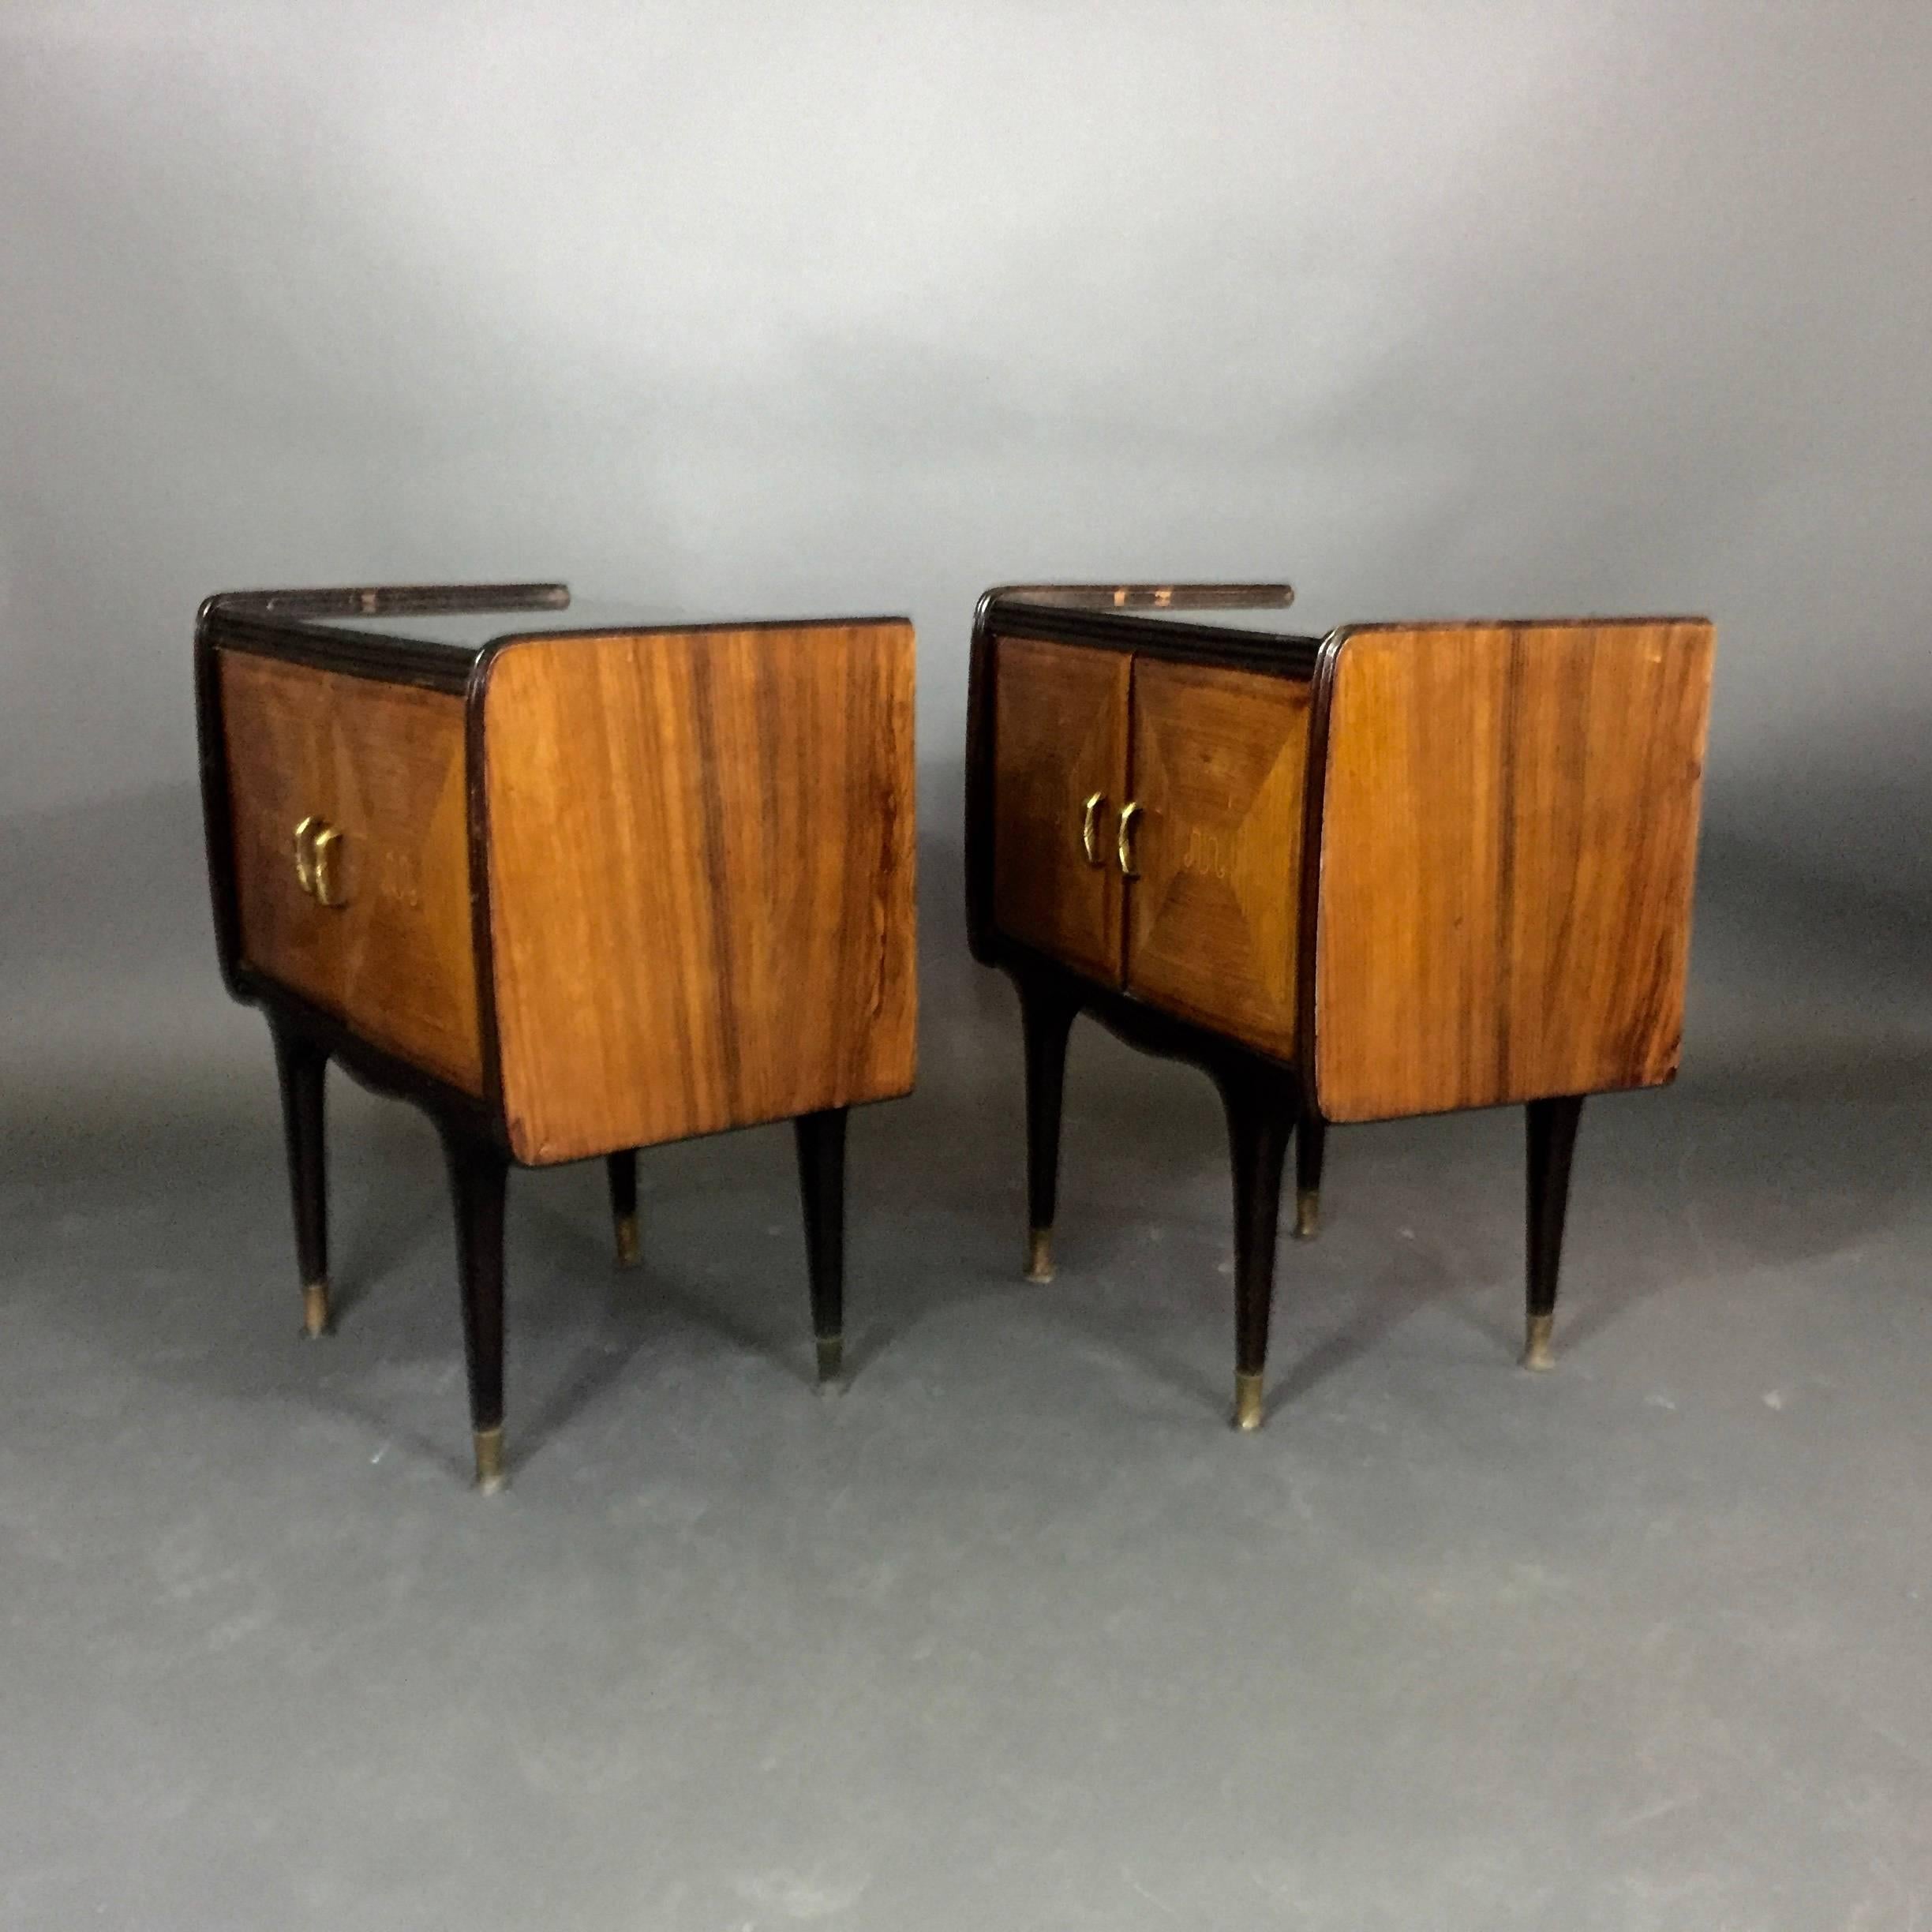 Mid-20th Century Pair of 1950s Italian Rosewood and Lacquered Nightstands For Sale